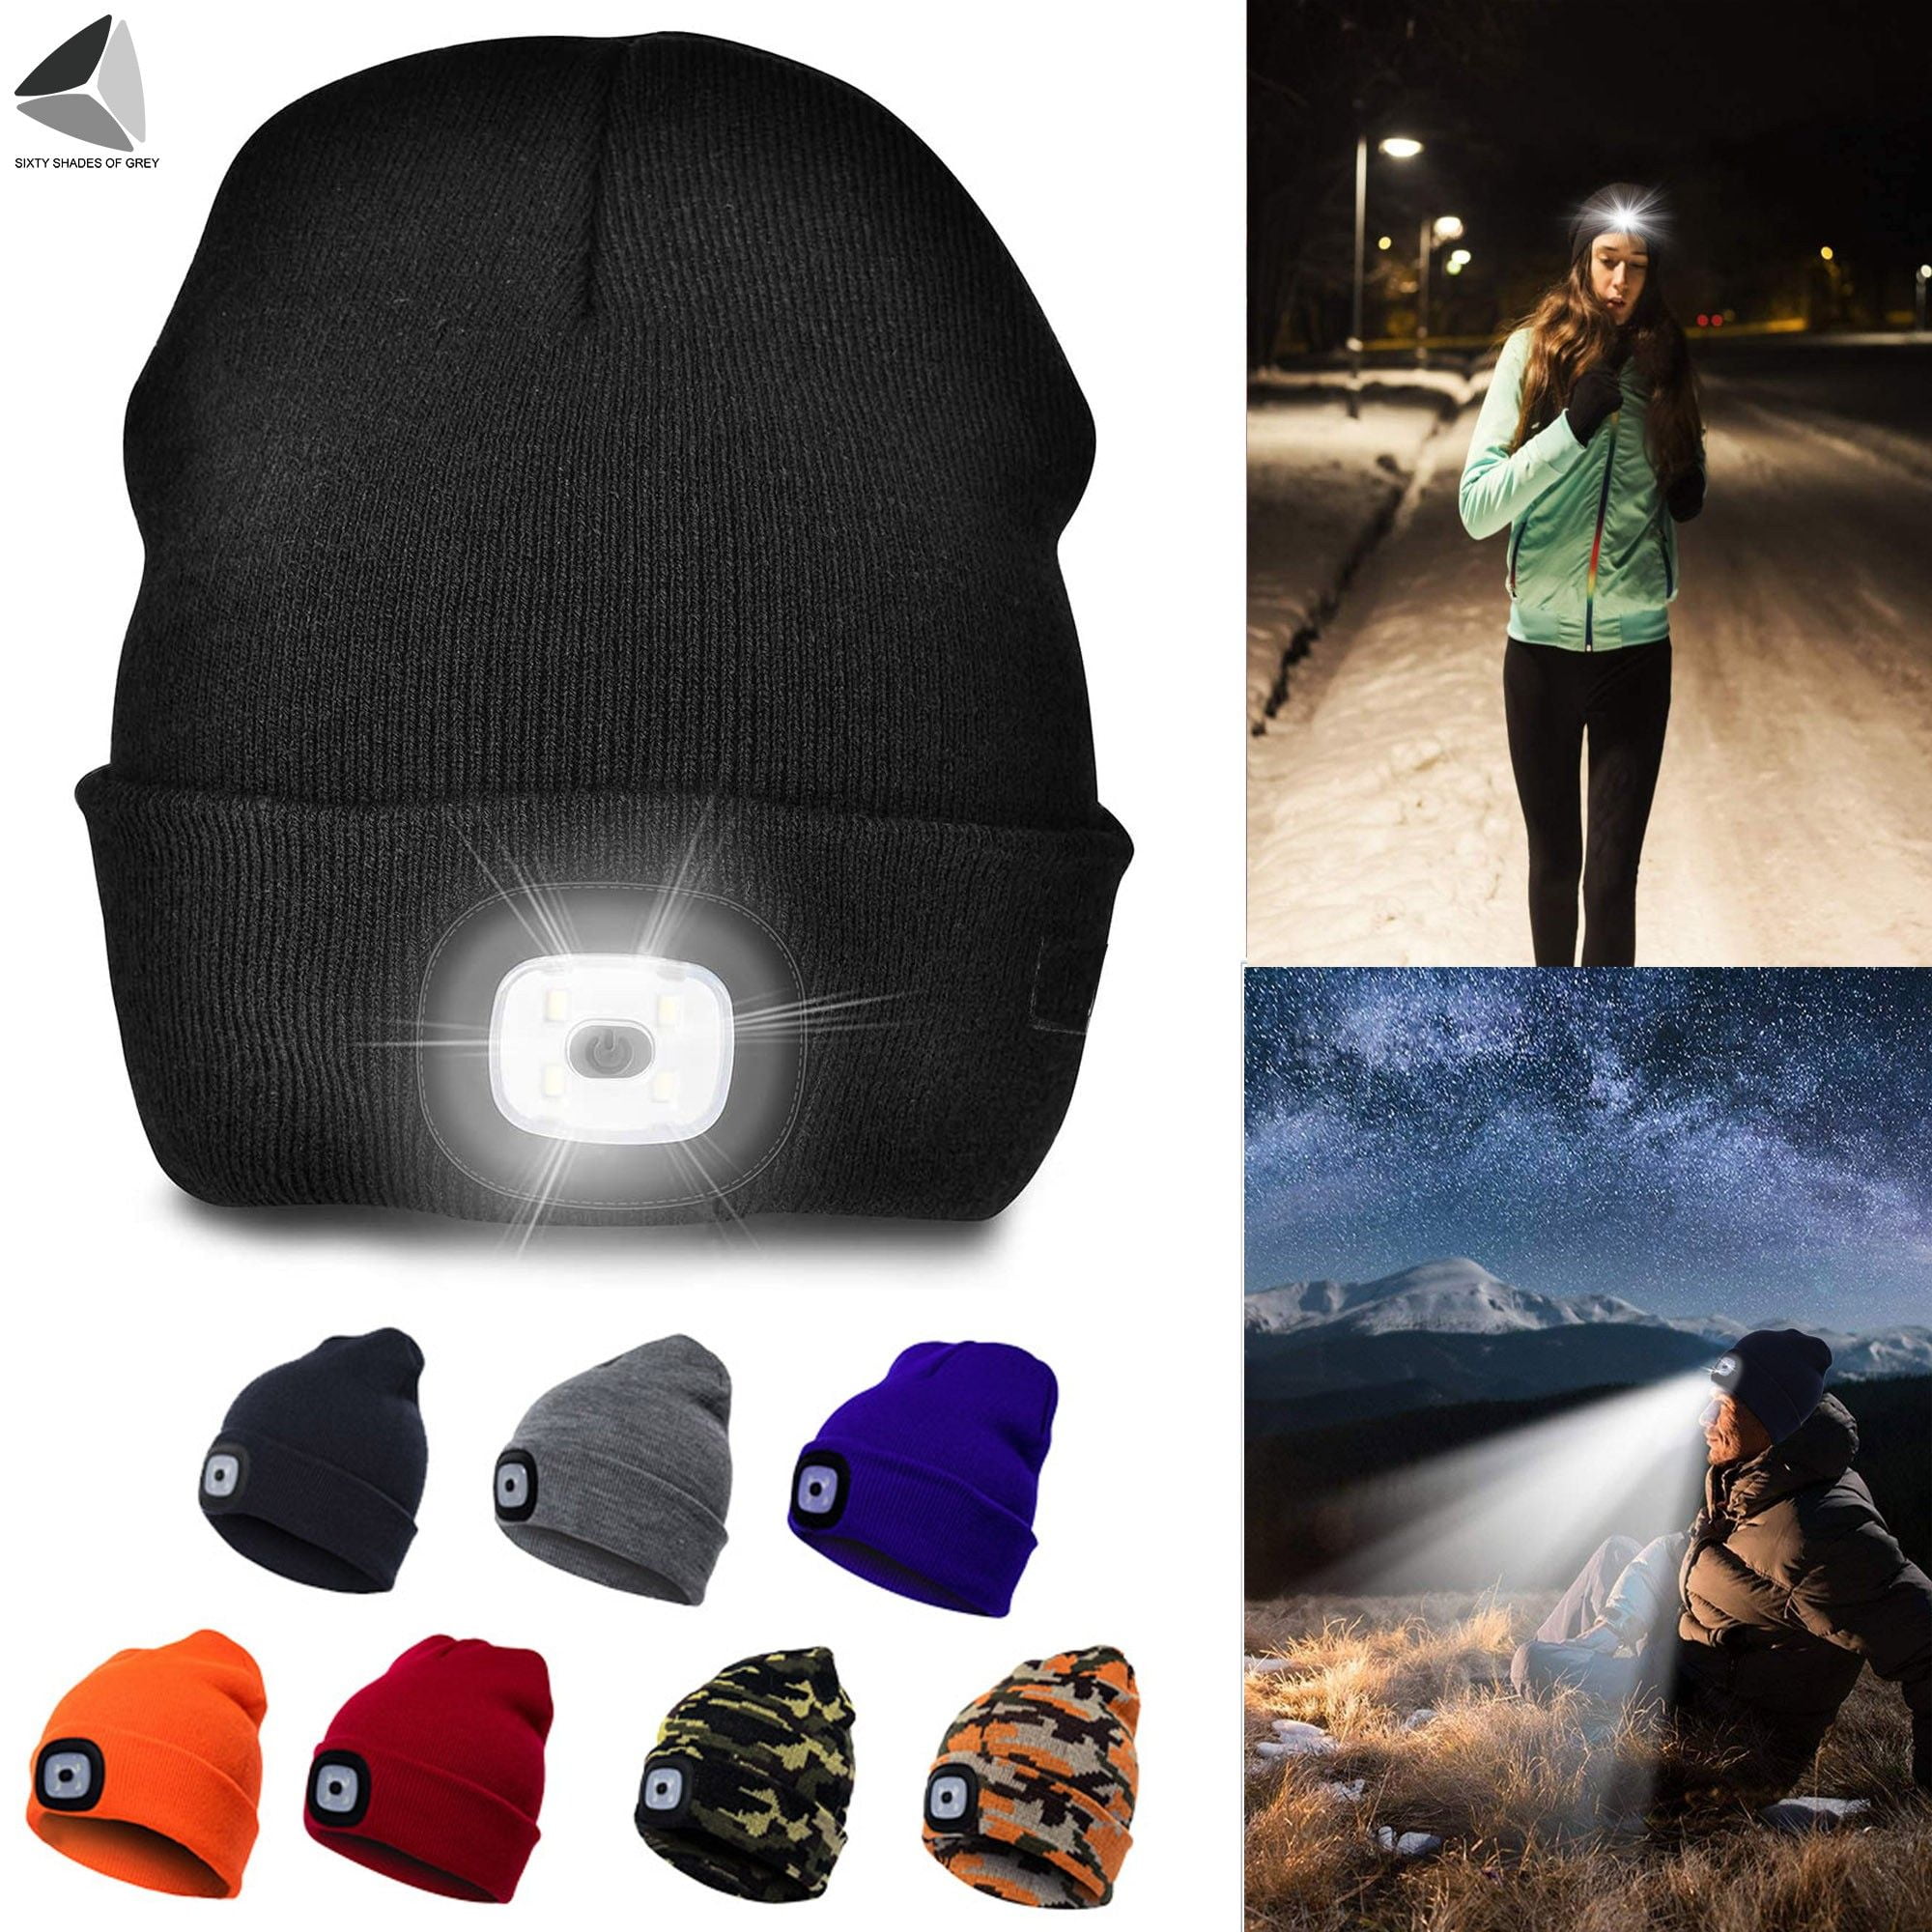 Sixtyshades of Grey Sixtyshades LED Beanie Hat with Light USB Rechargeable Hands Free 4 LED